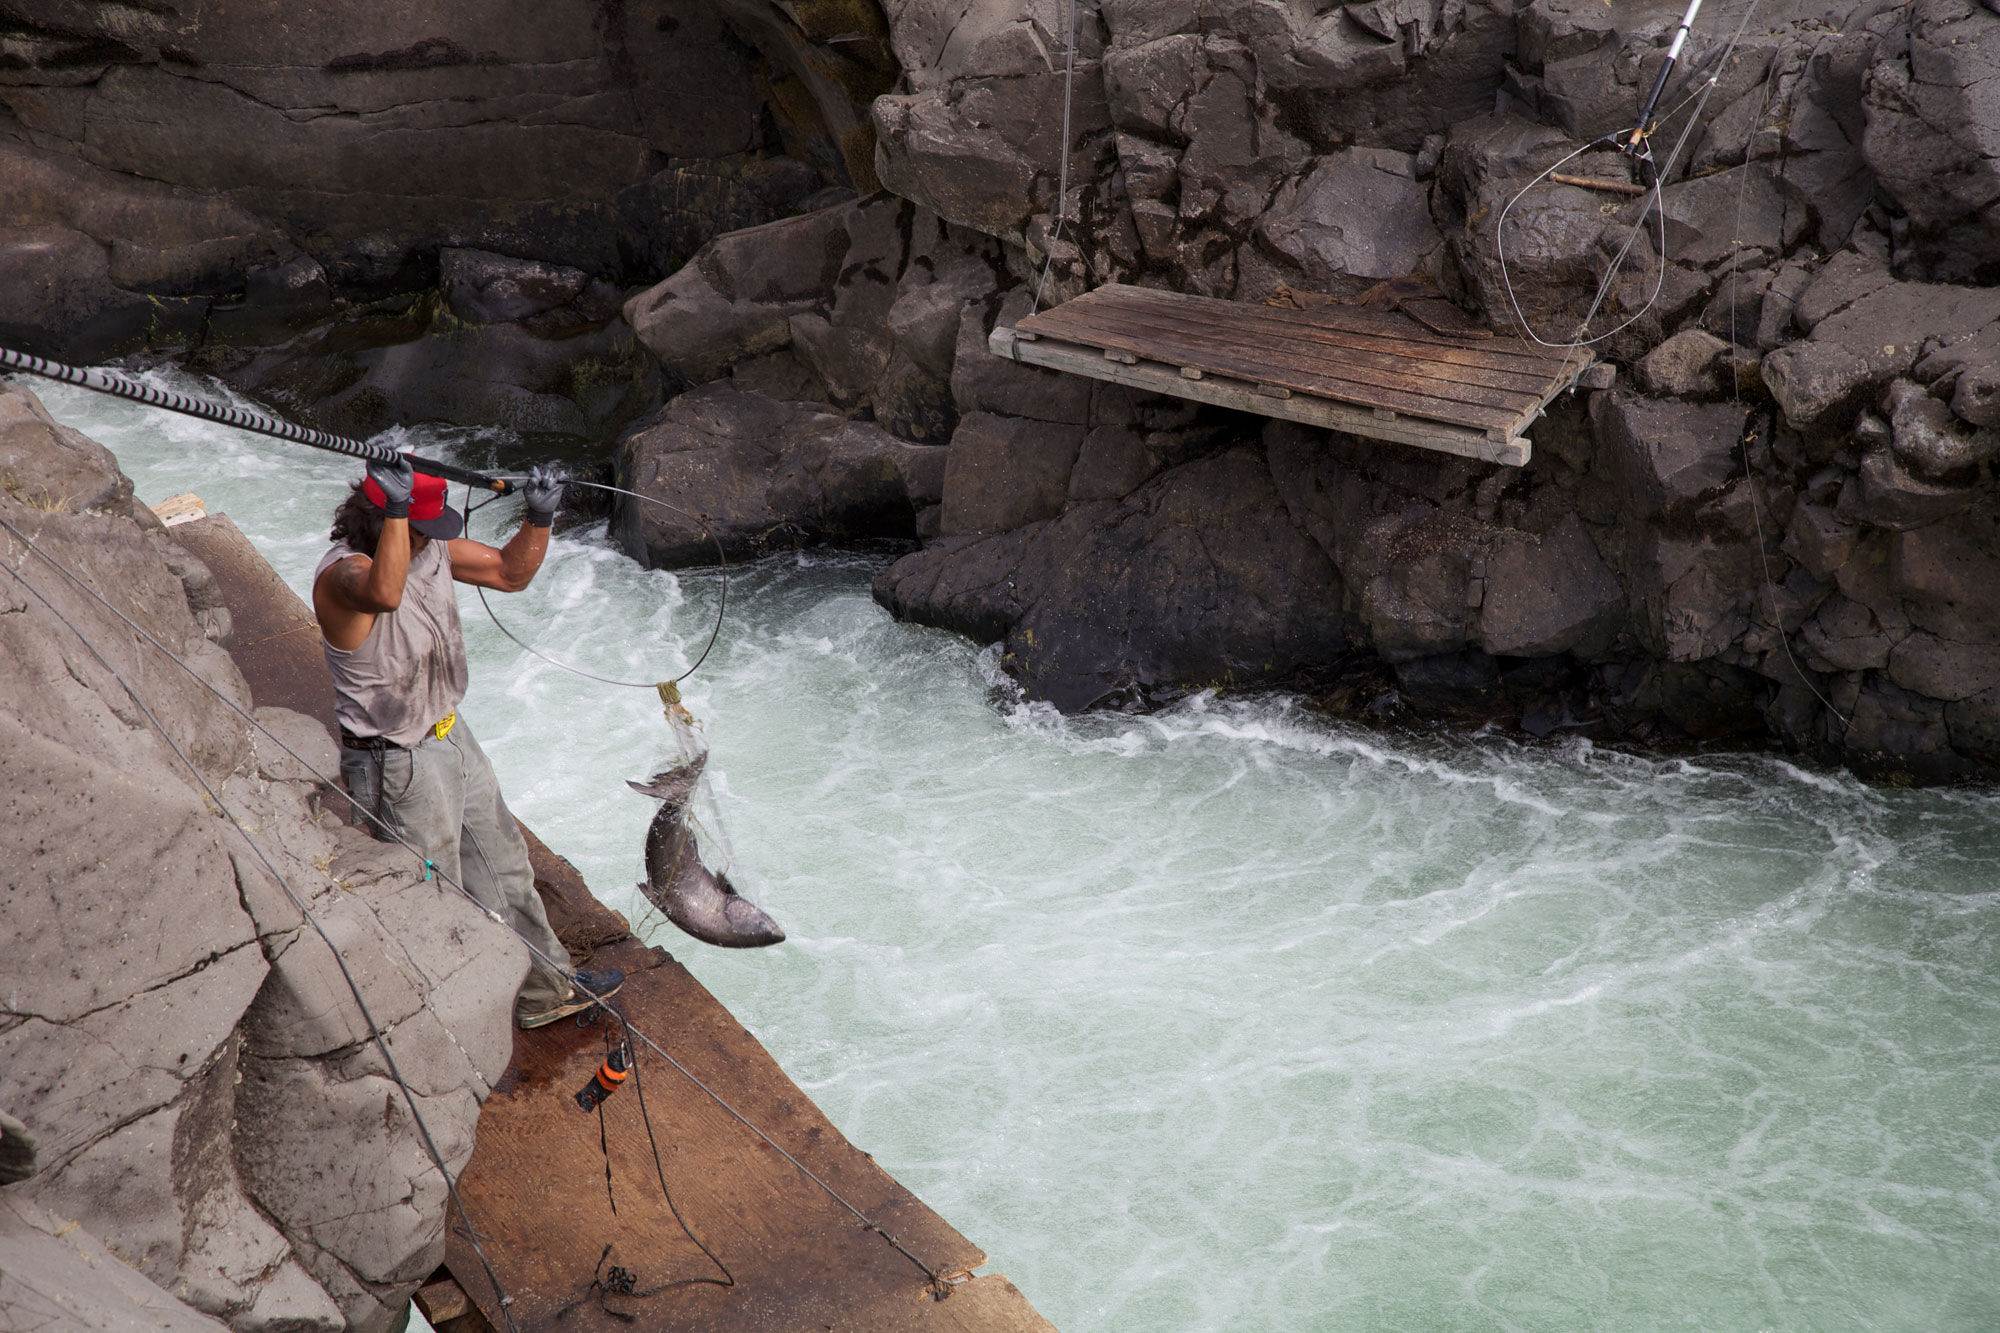 Photo of a member of the Yakima tribe fishing on the Klickitat River, Washington. The photo shows a man standing on the edge of a cliff with a long-handled net. A large fish is caught in the net, and the man is lifting it out of the water. An empty wooden platform is attached to the cliff on the opposite side of the river.